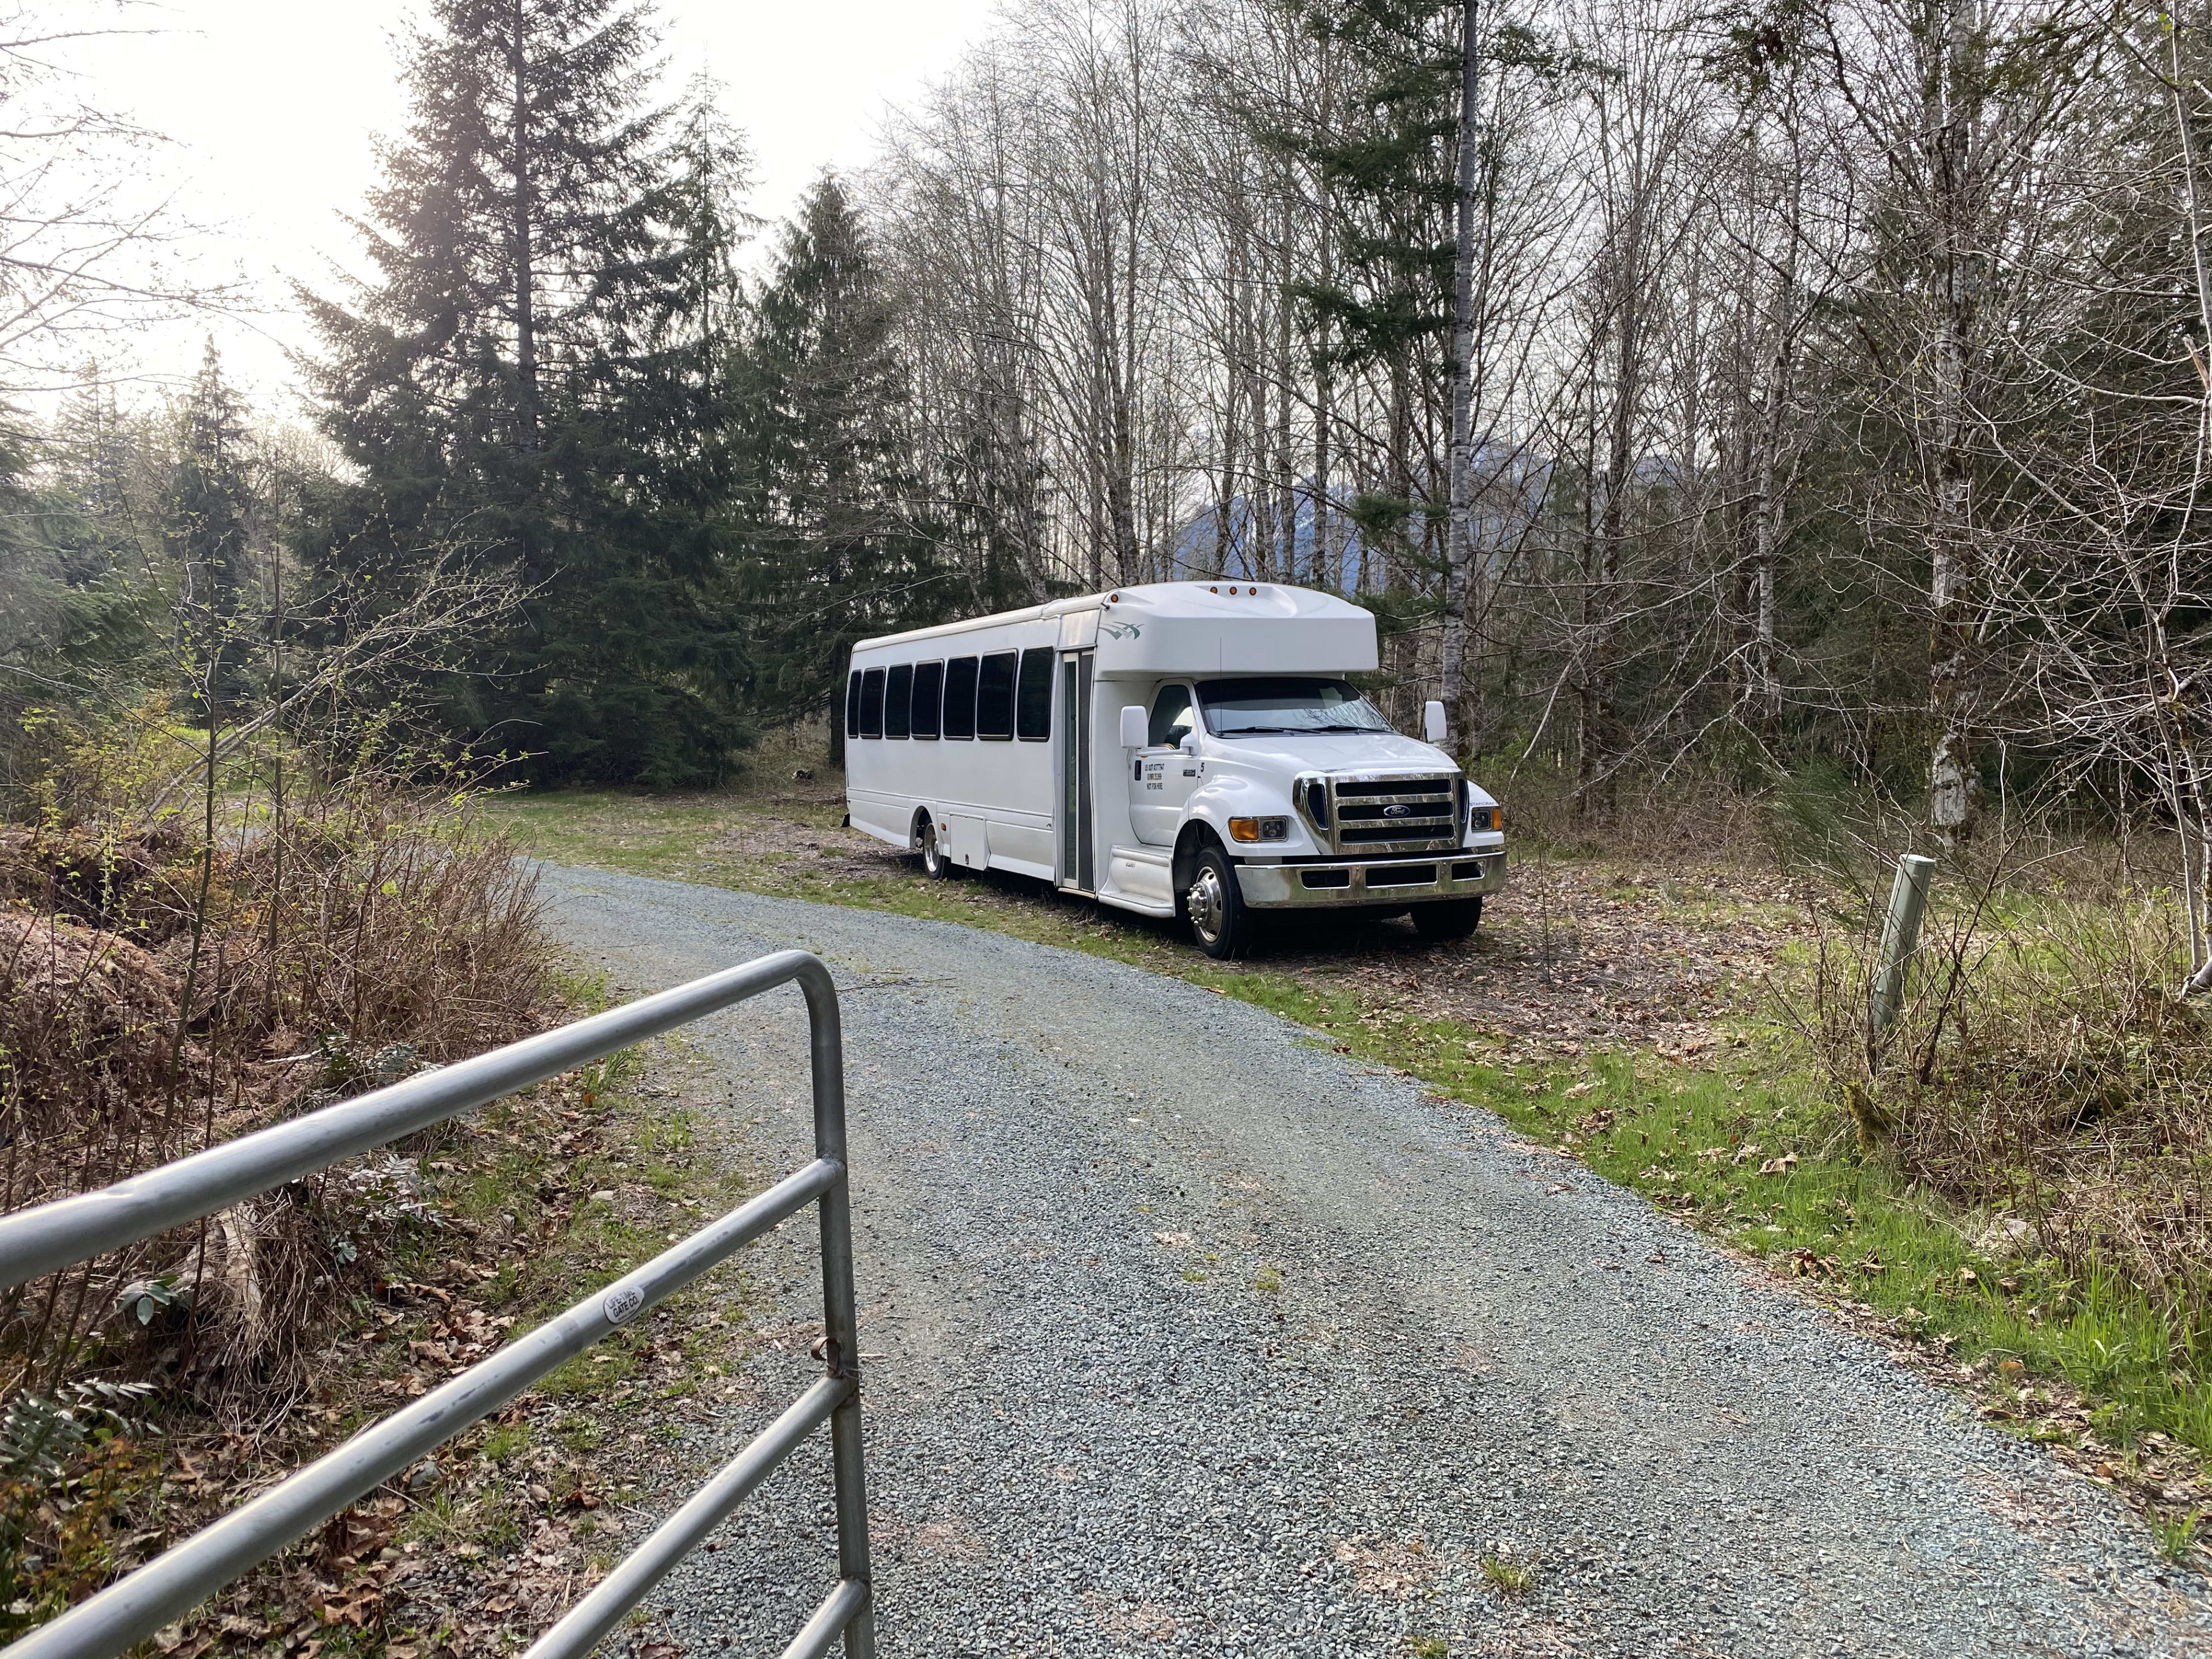 Spot is Near Entrance (Recent Guest's Bus Pictured)